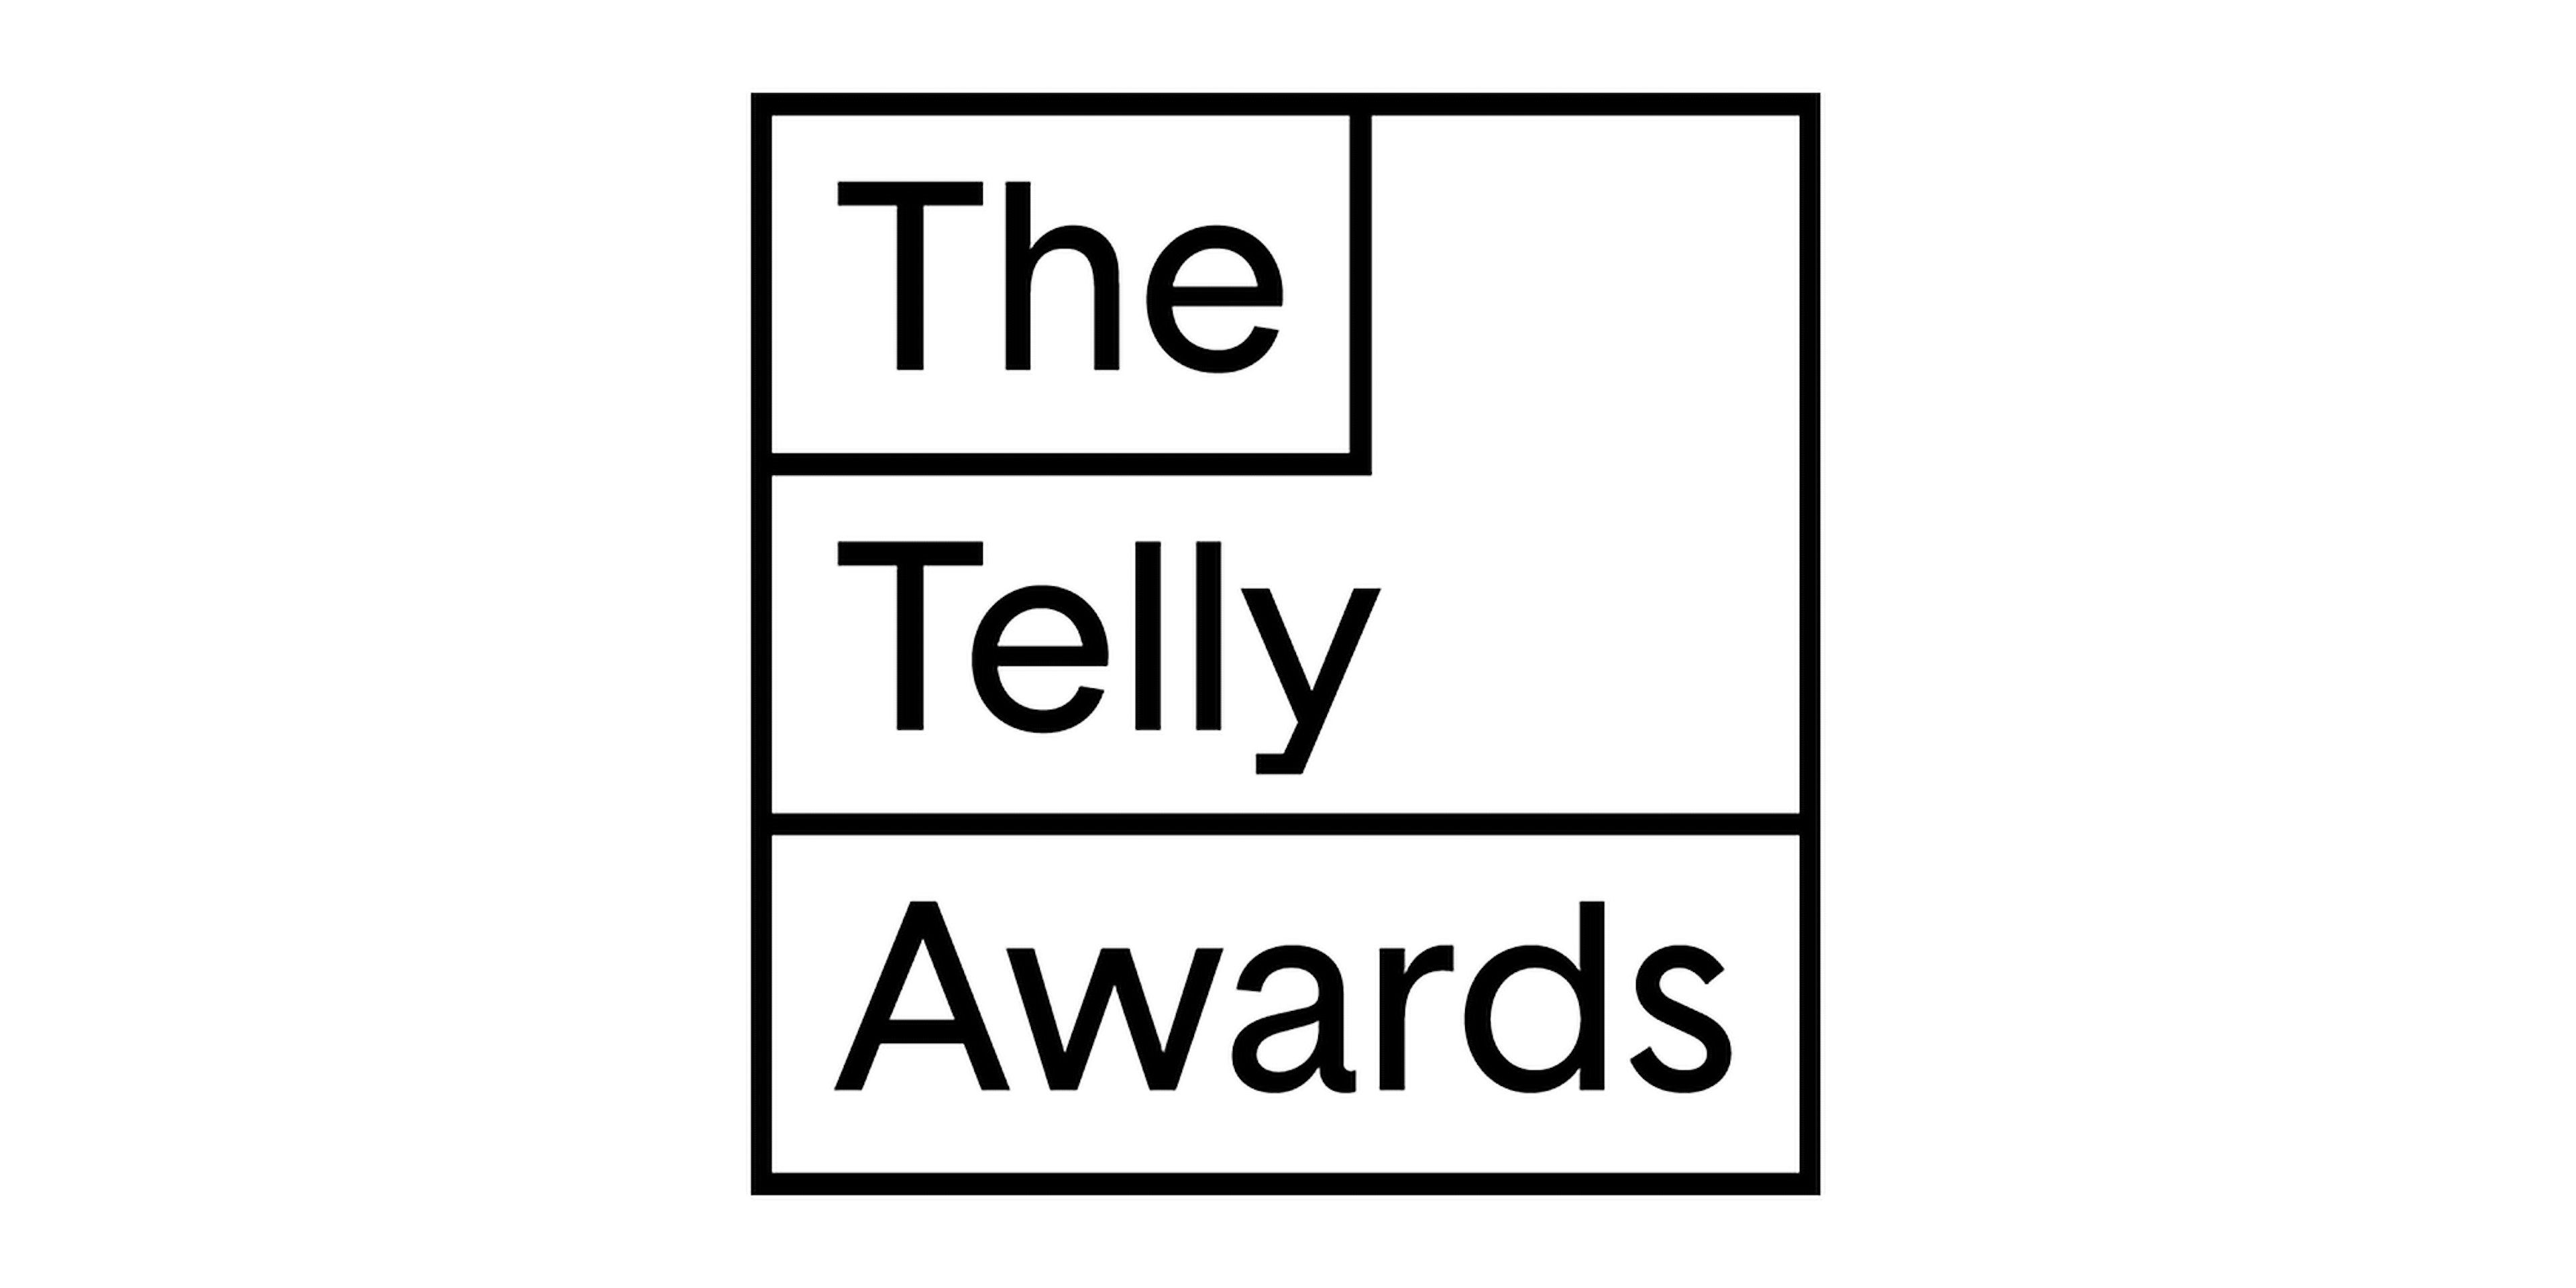 The Embassy scores a double at The Telly Awards